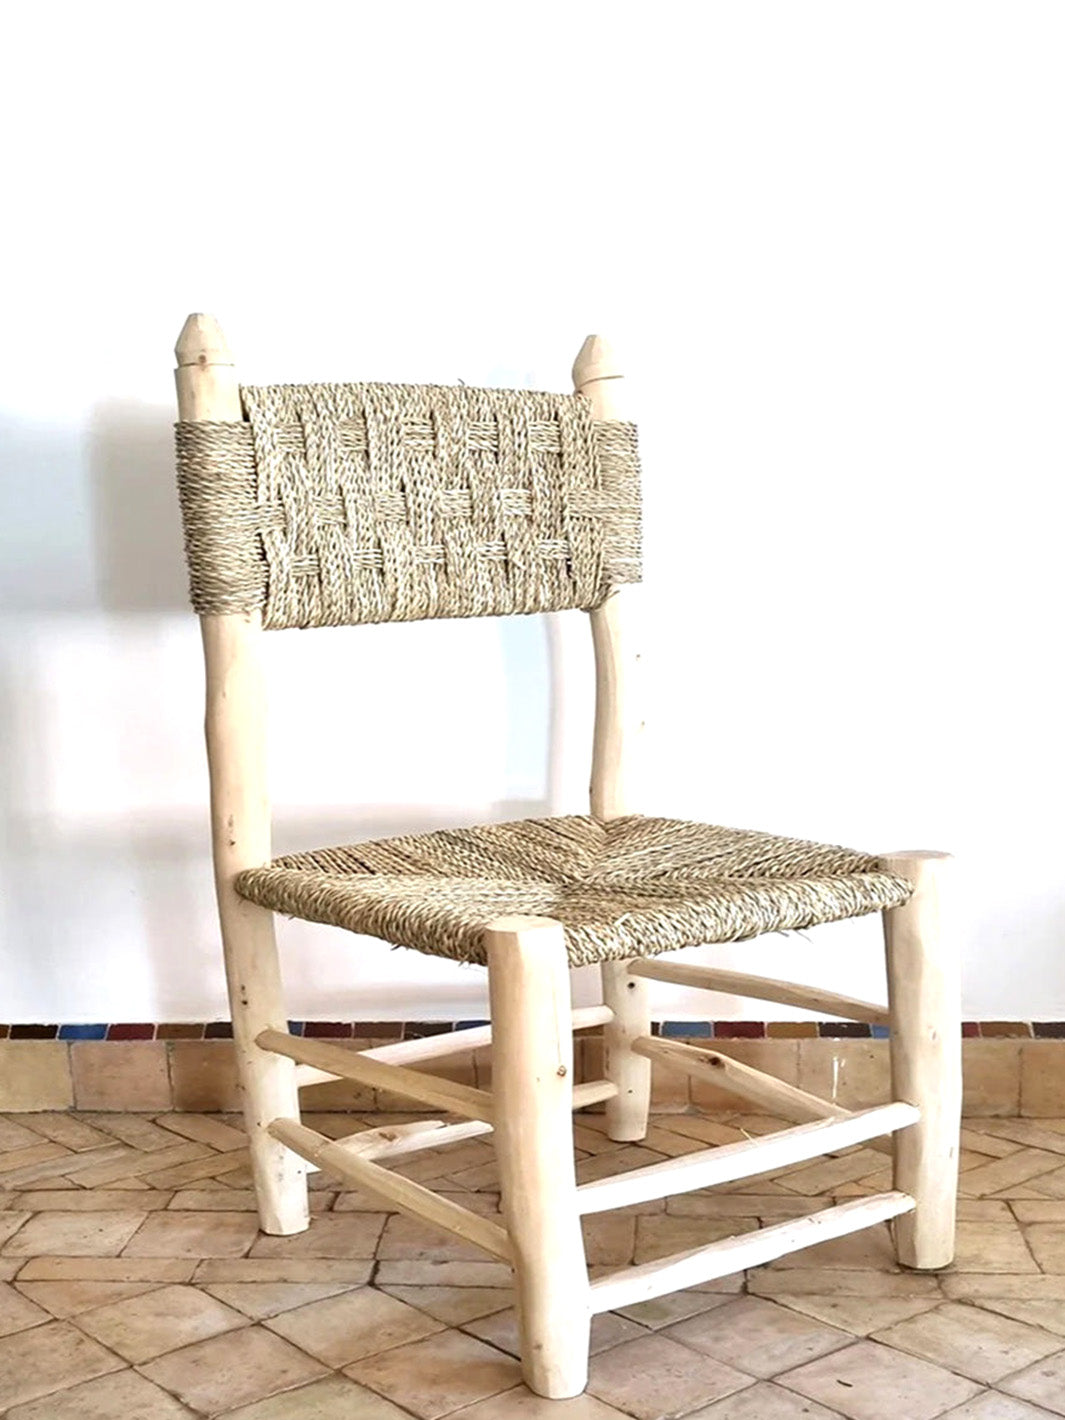 Handcrafted Laurel Wood Artisanal Moroccan Chair Libitii Chairs LIB-0027-2